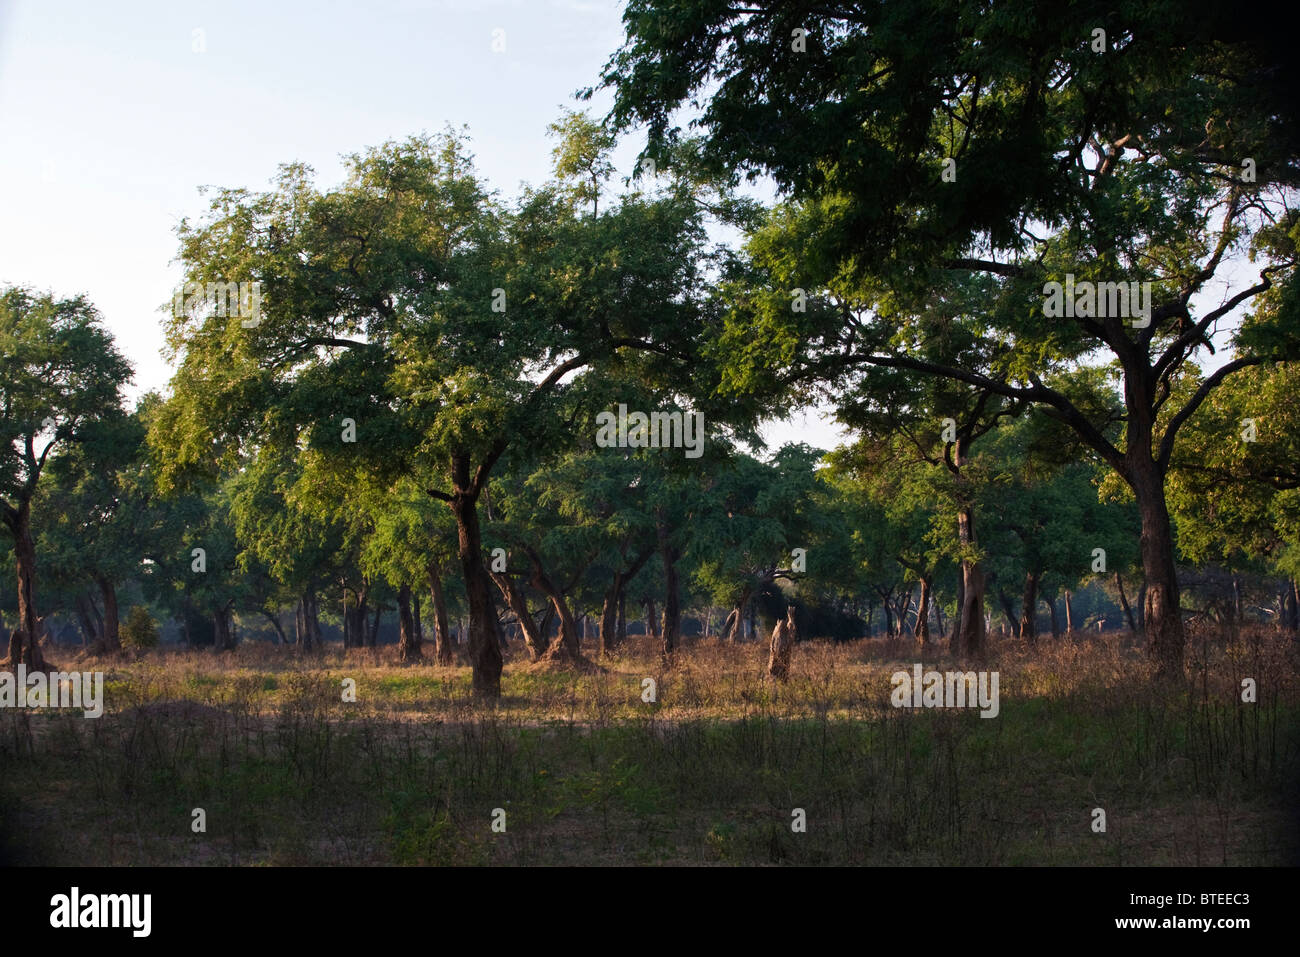 Feidherbia albida forest on the banks of the Zambezi river in Mana Pools National Park Stock Photo